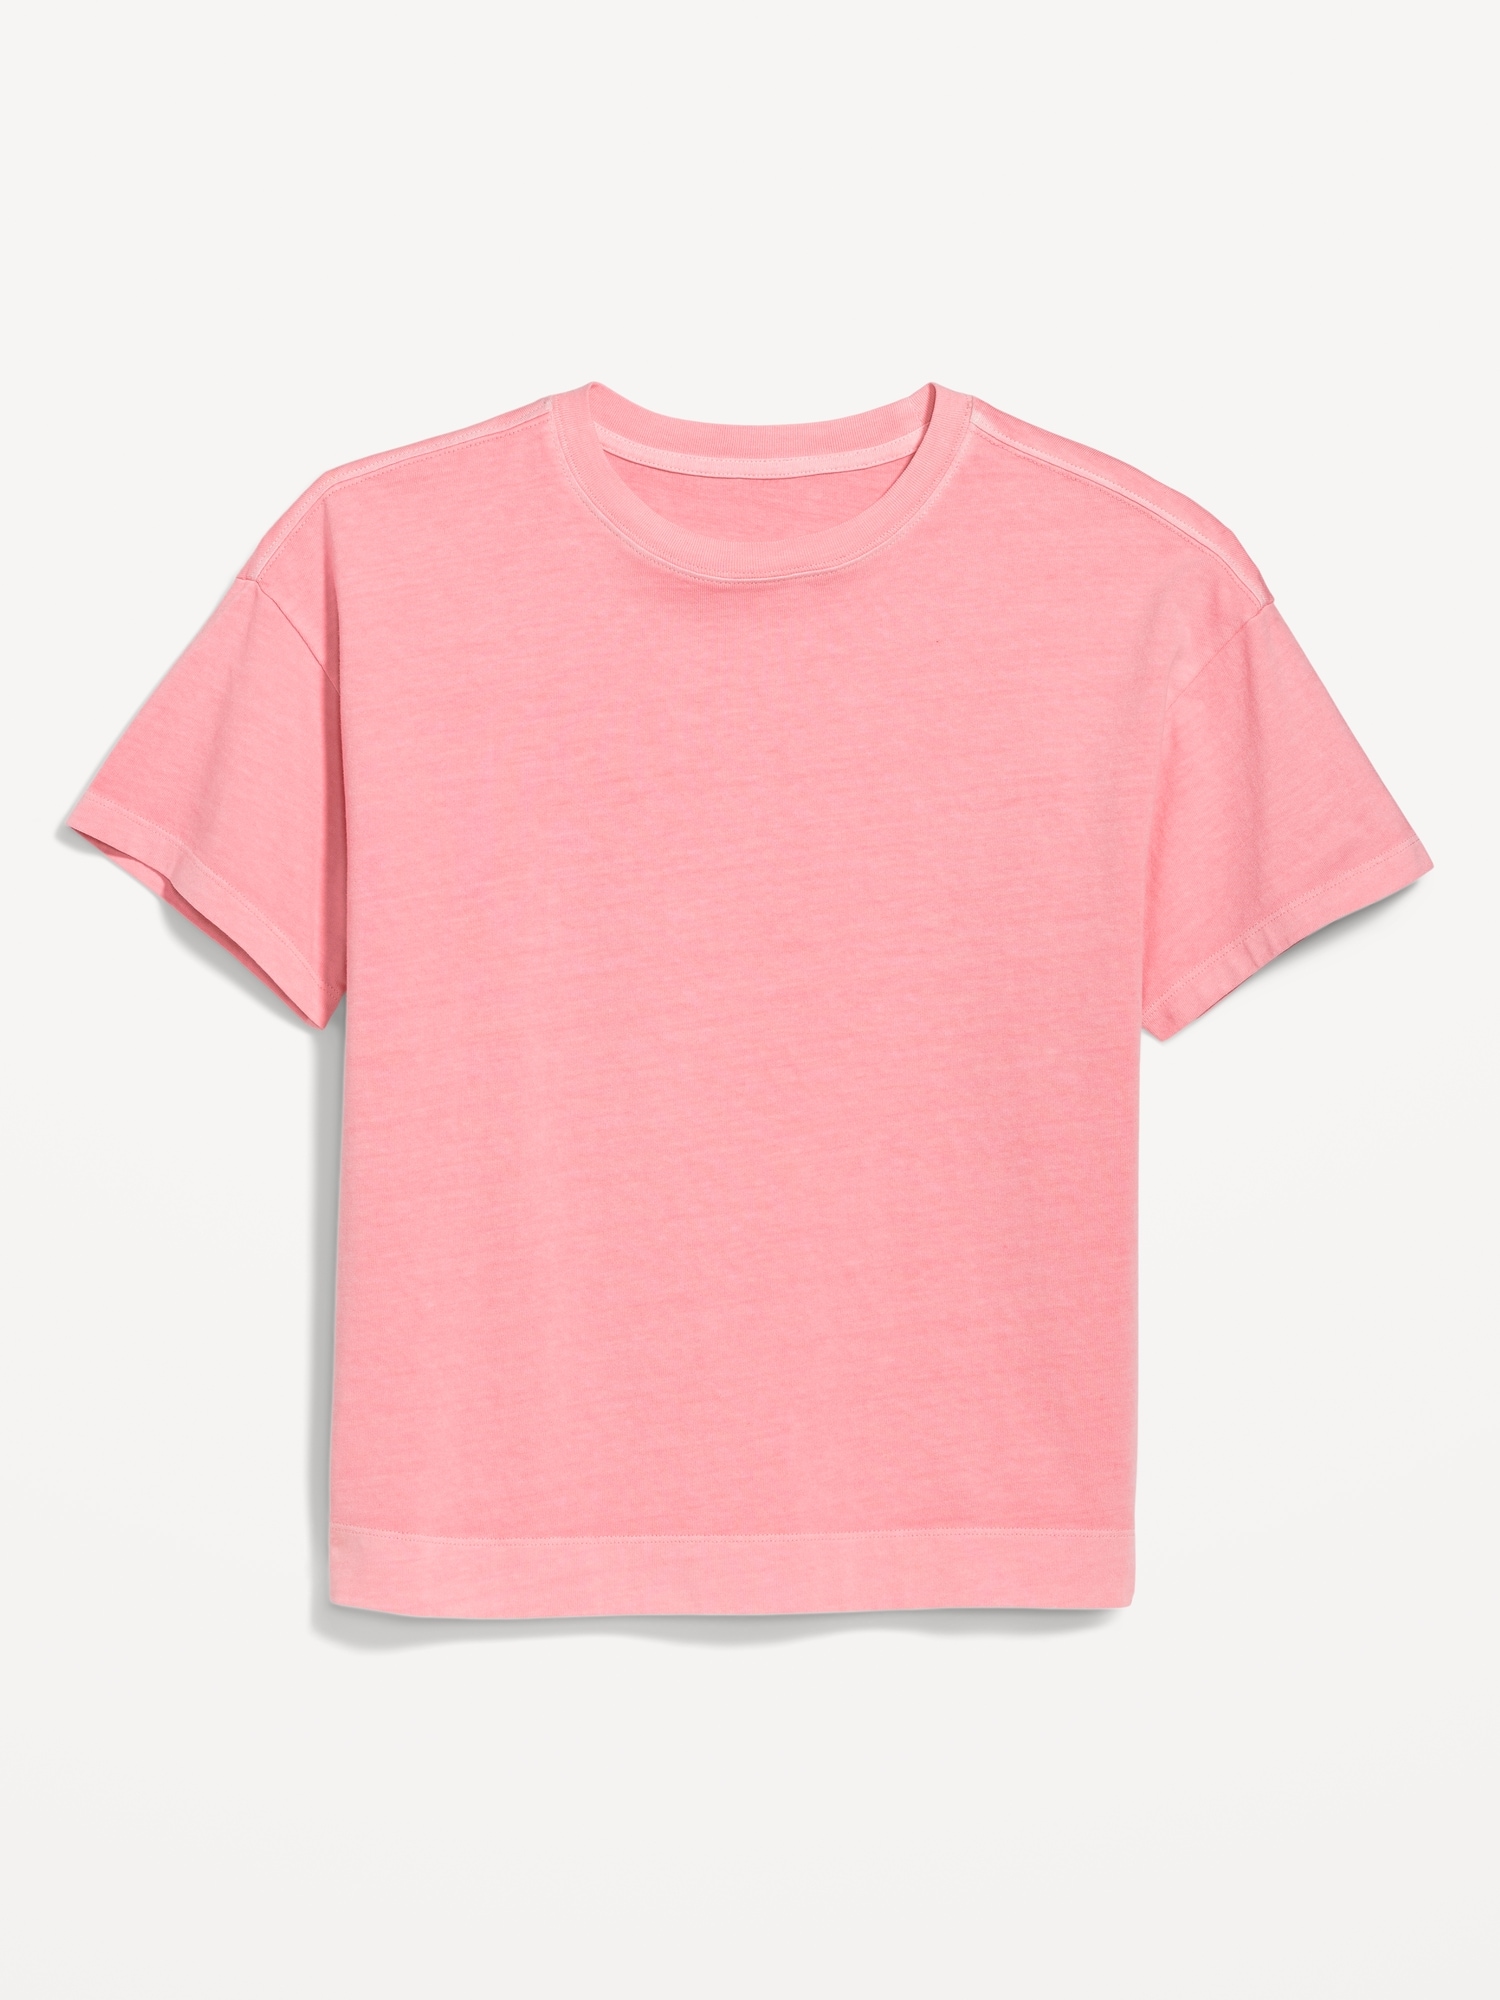 Vintage Crew-Neck T-Shirt for Women | Old Navy